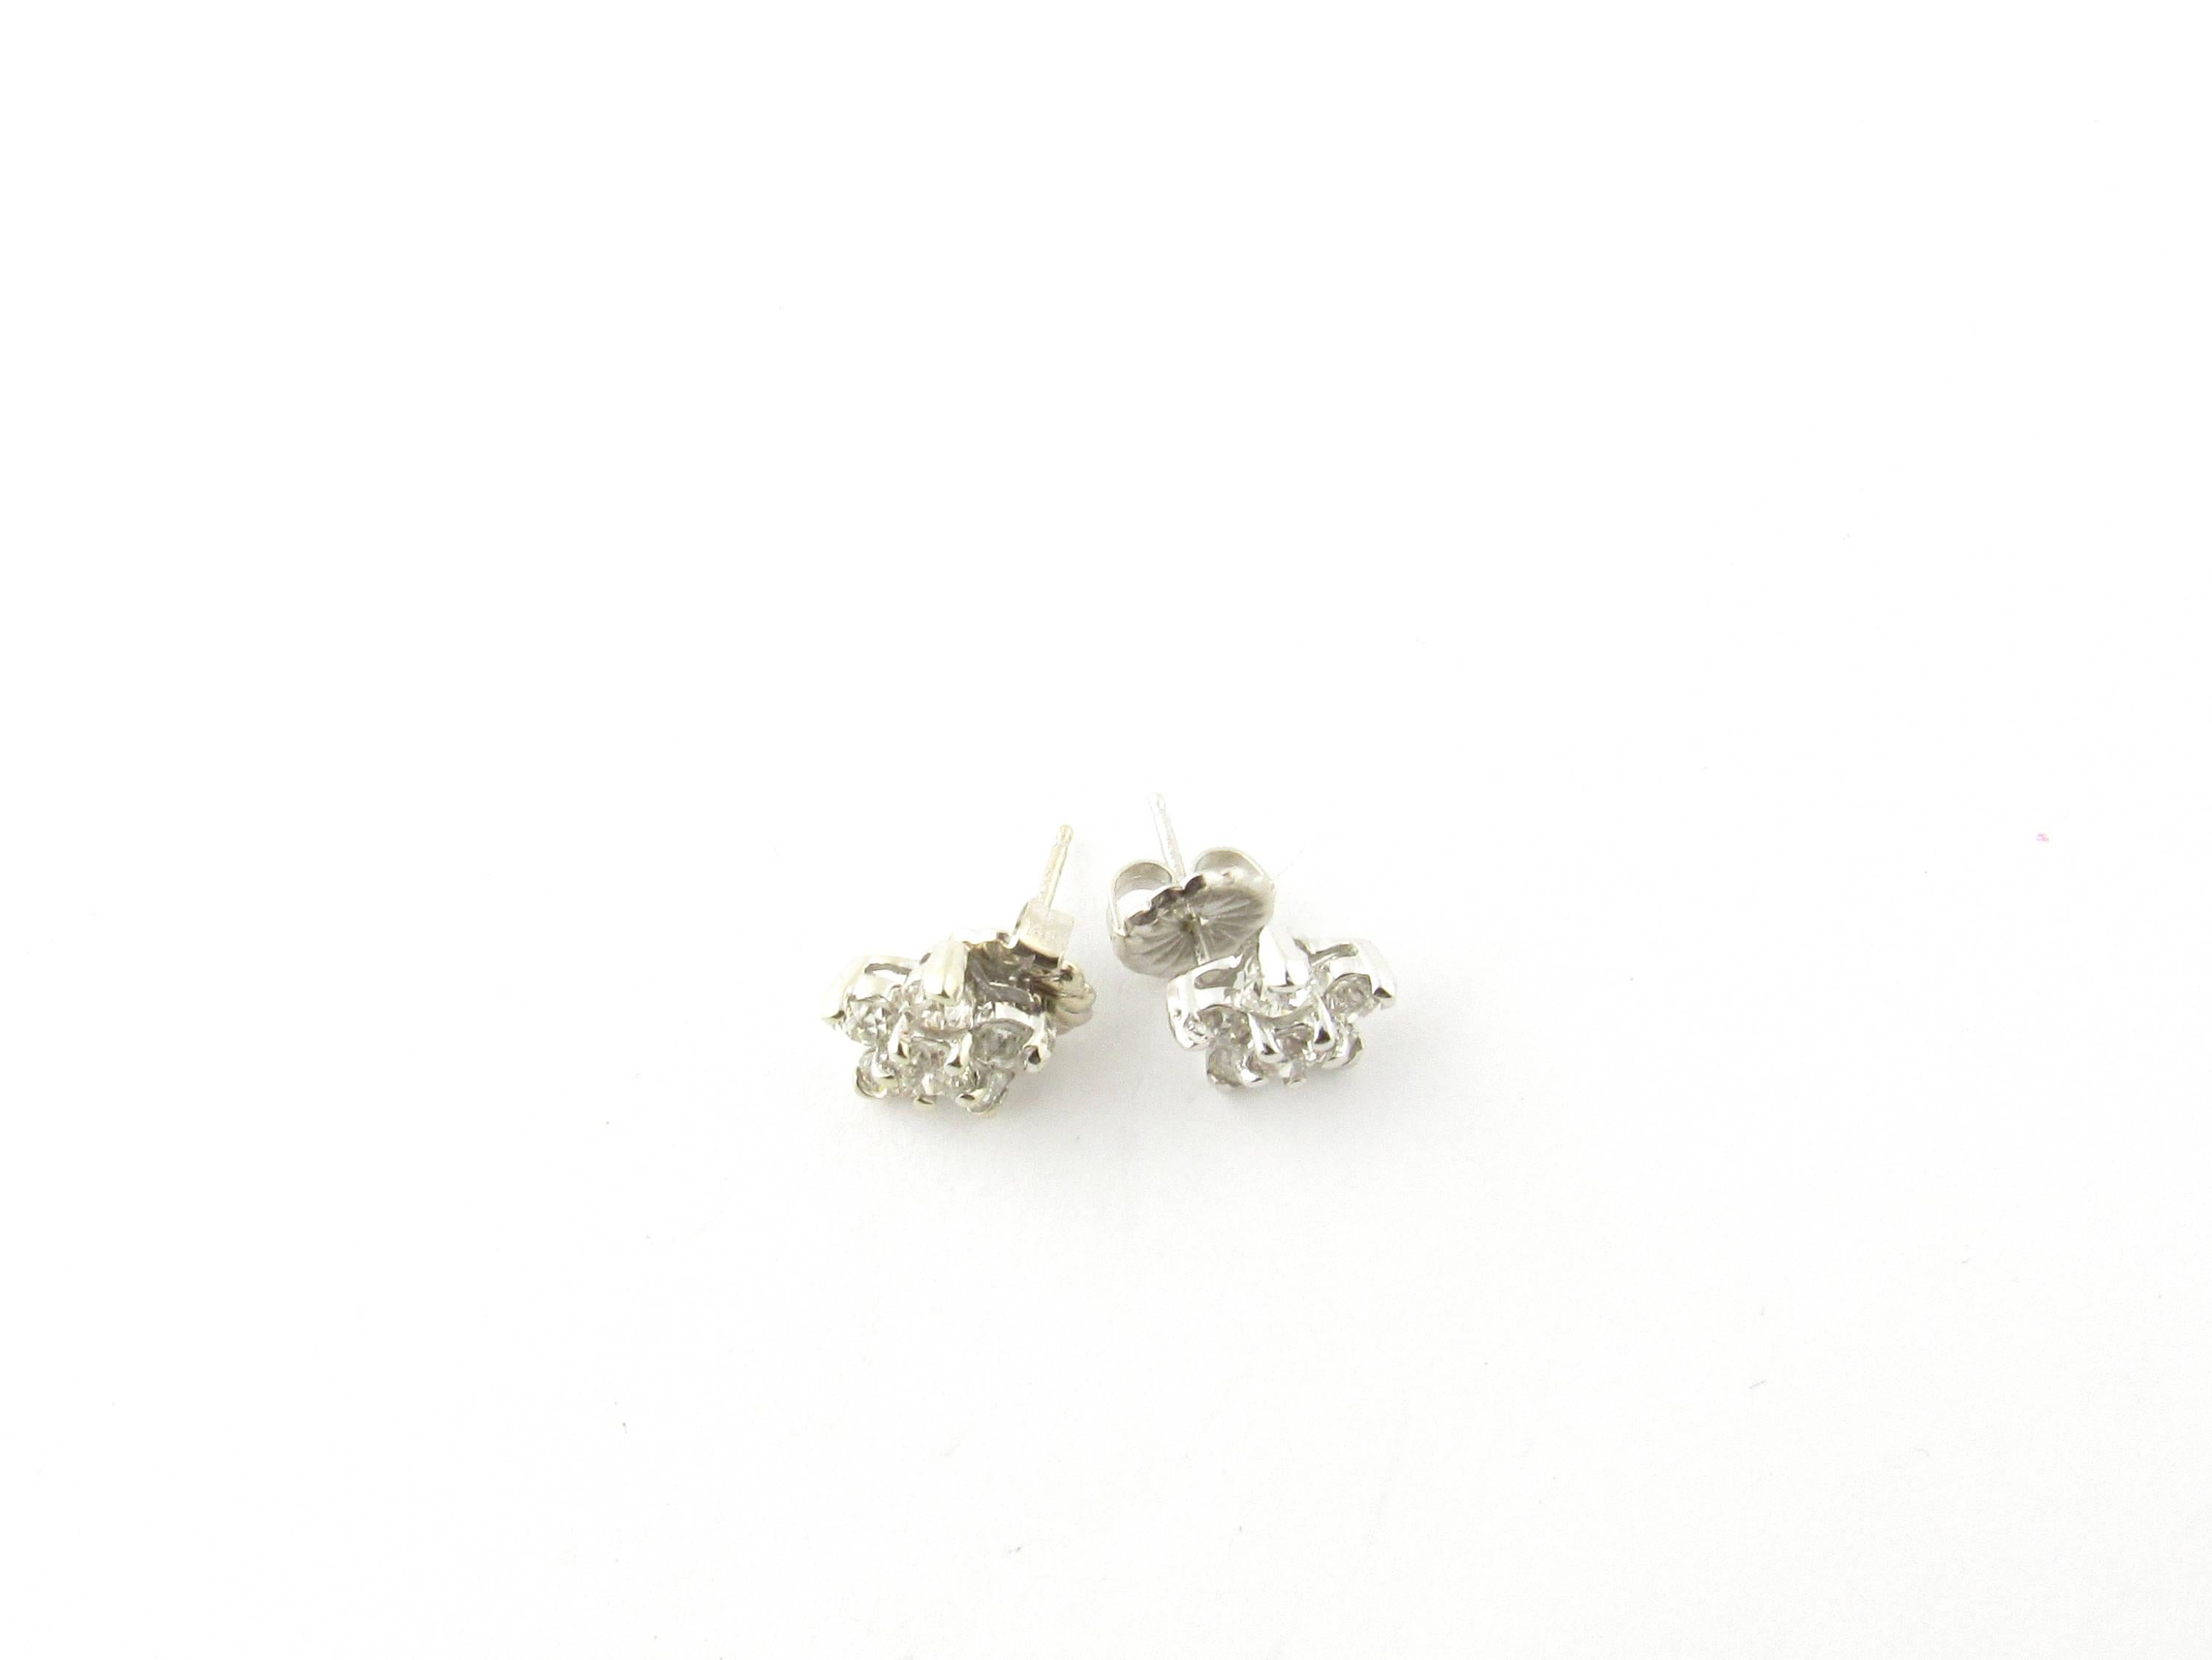 Vintage 14 Karat White Gold Diamond Flower Earrings-

These sparkling earrings each feature six round old mine cut diamonds set in an exquisite flower design.

Approximate total diamond weight: 1.20 cts.

Diamond color: H

Diamond clarity: